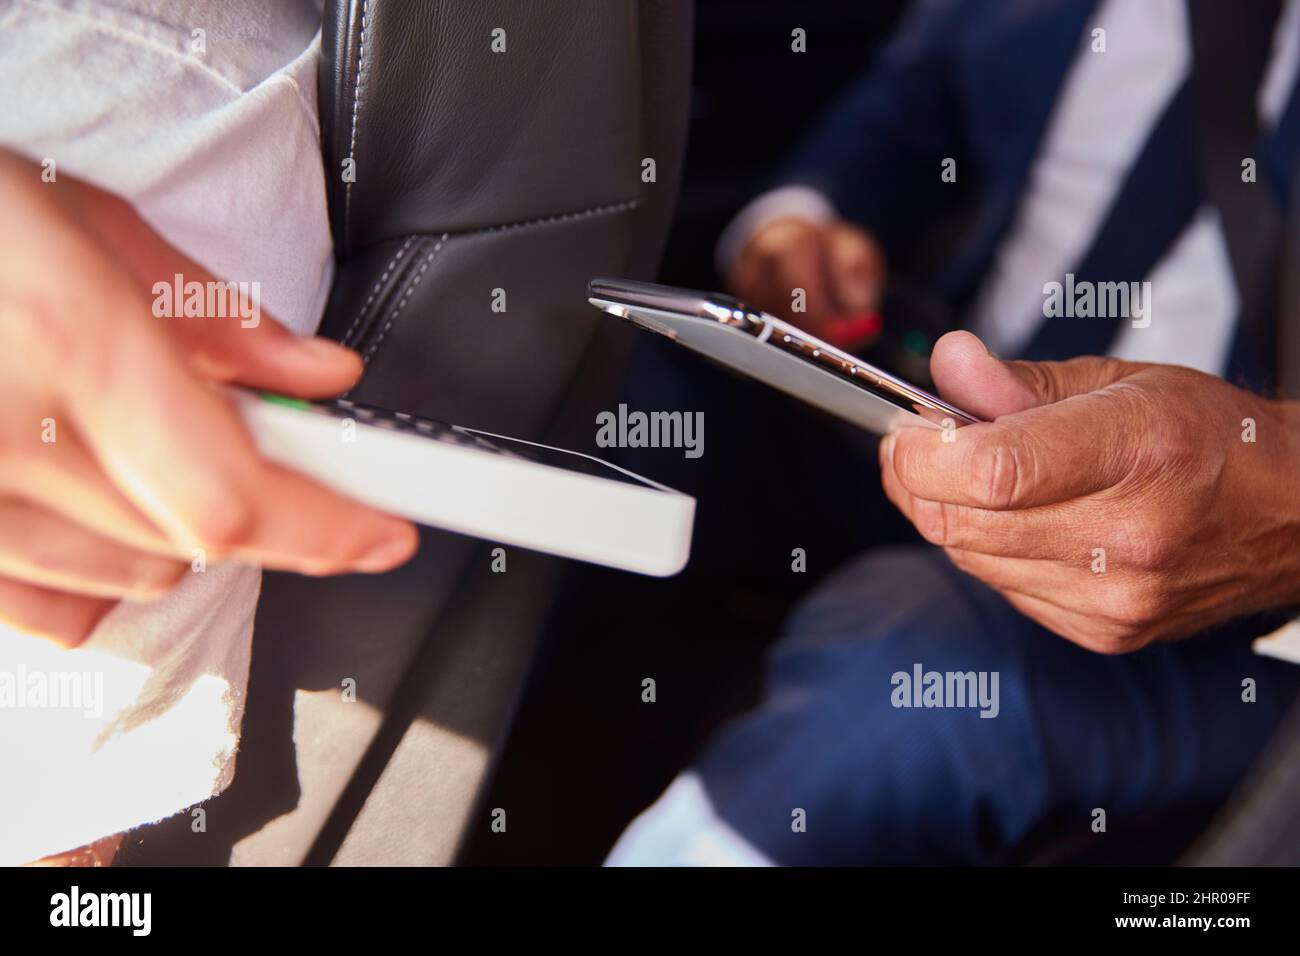 Close Up Of Businessman In Back Of Taxi Paying Fare Using Contactless Payment App On Mobile Phone Stock Photo